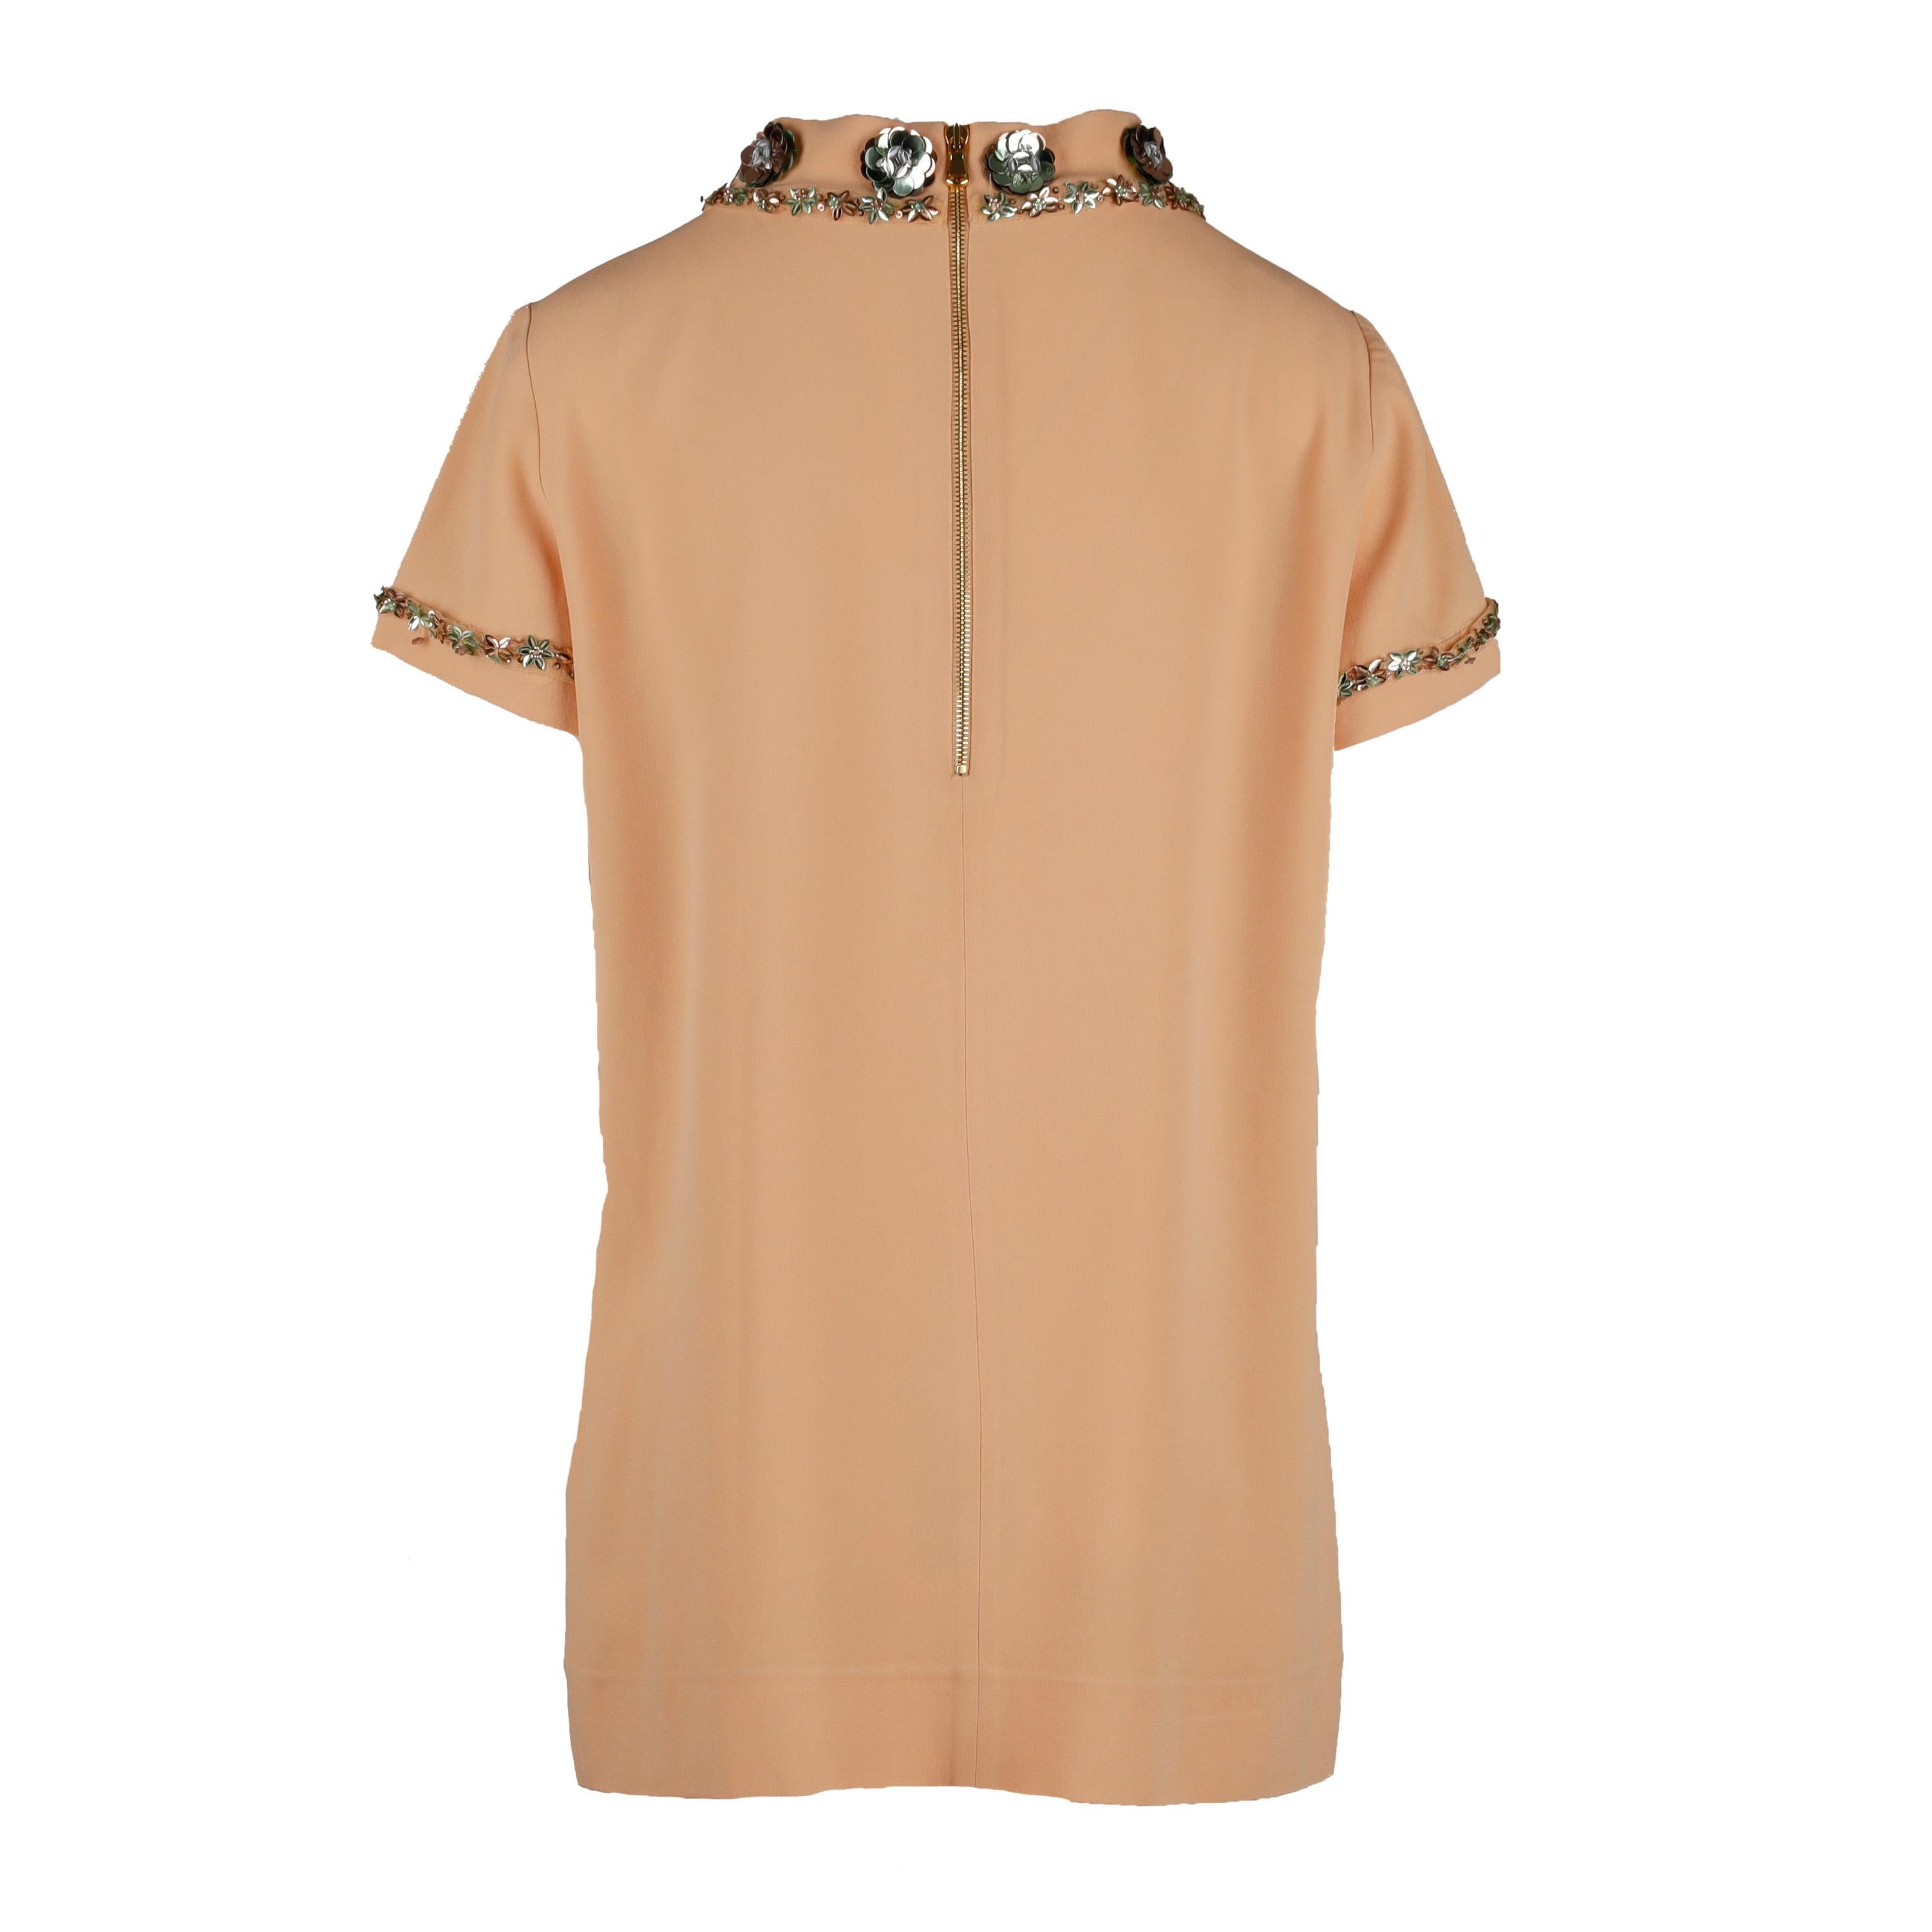 This Moschino blouse is the perfect summer staple. Crafted in a soft melon orange hue, this short sleeve blouse is adorned with a beautiful flower arrangement of sequins. The high crew neck and sleeve hem feature unique embellishment for a subtle